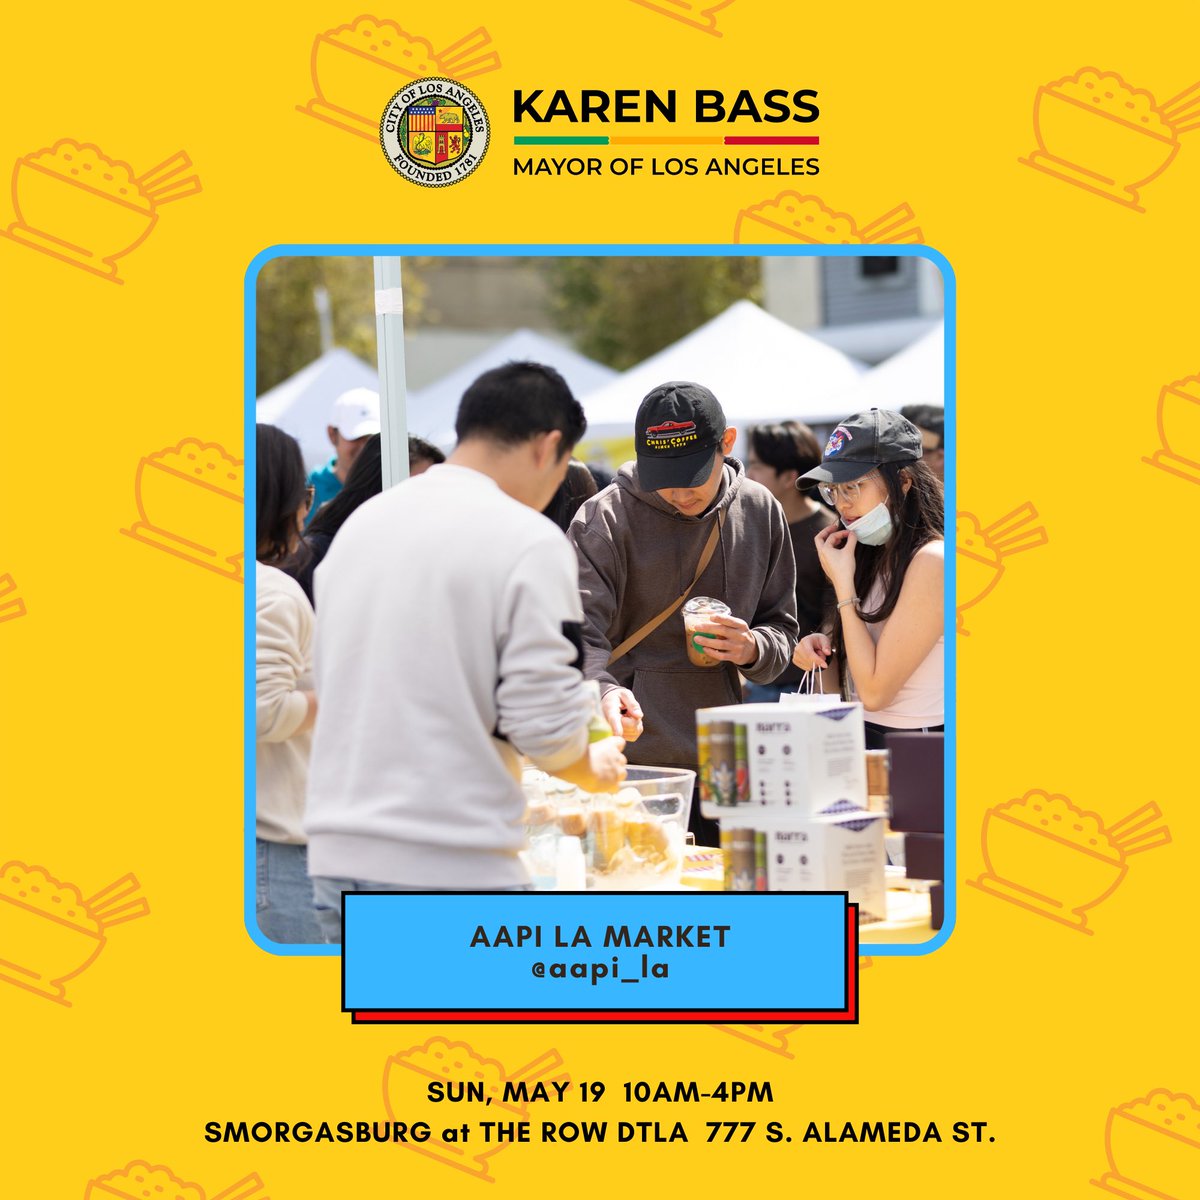 Celebrate Asian American and Pacific Islander heritage and culture at Smorgasburg today!! Support small businesses and get to know local AAPI creatives and entrepreneurs in Los Angeles. Entry is FREE. ⏰ 10:00 am to 4:00 pm 📍 The Row DTLA: 777 S. Alameda St.